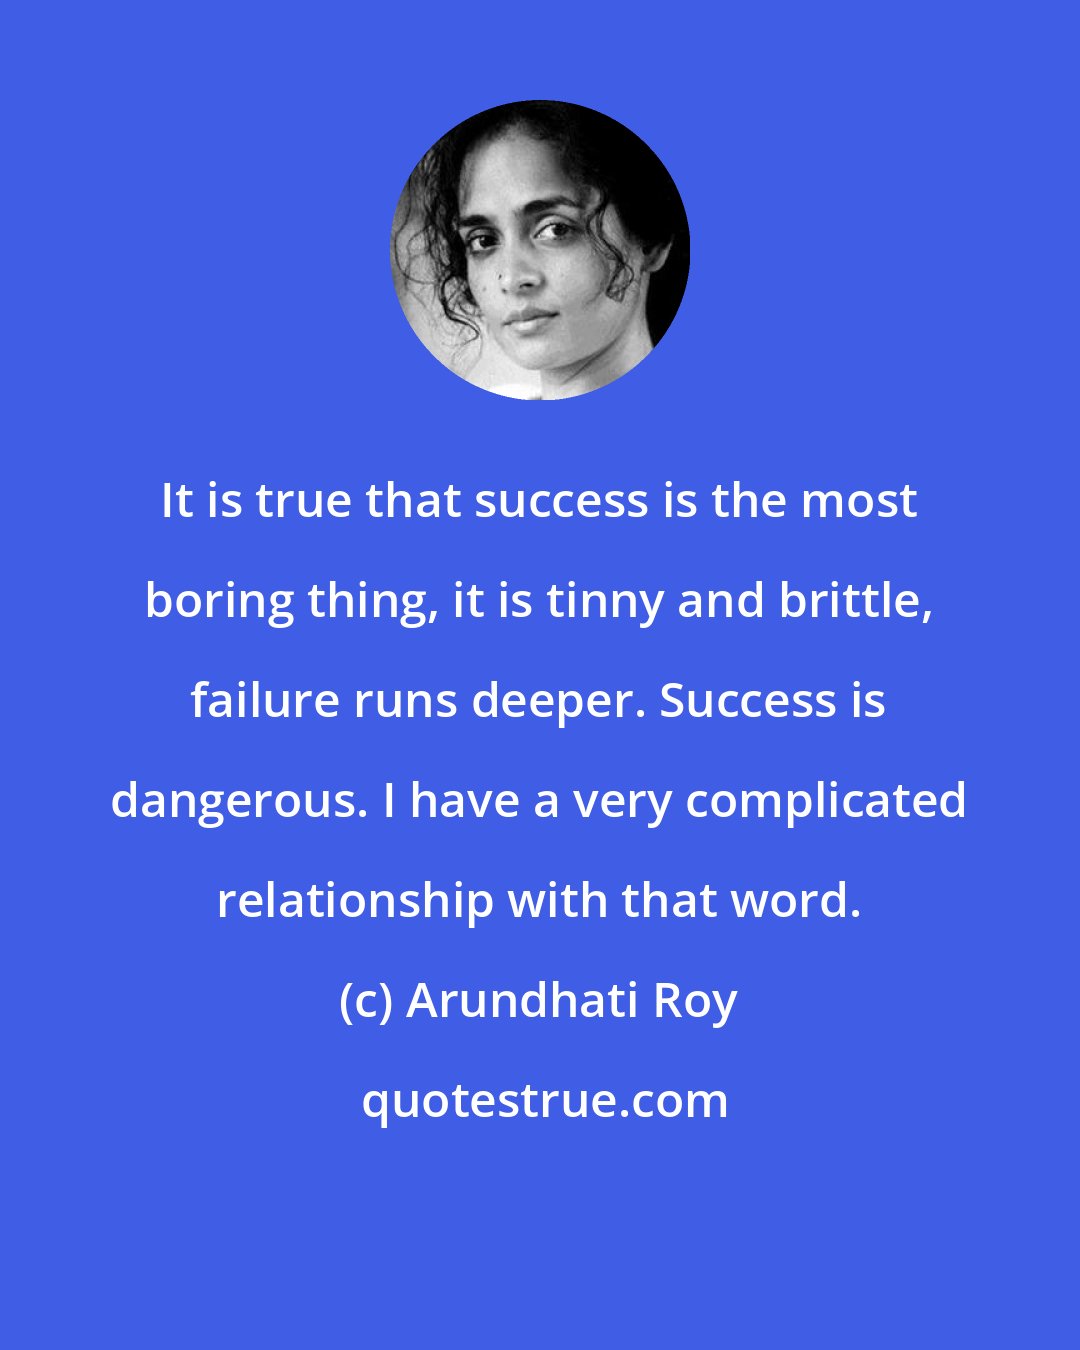 Arundhati Roy: It is true that success is the most boring thing, it is tinny and brittle, failure runs deeper. Success is dangerous. I have a very complicated relationship with that word.